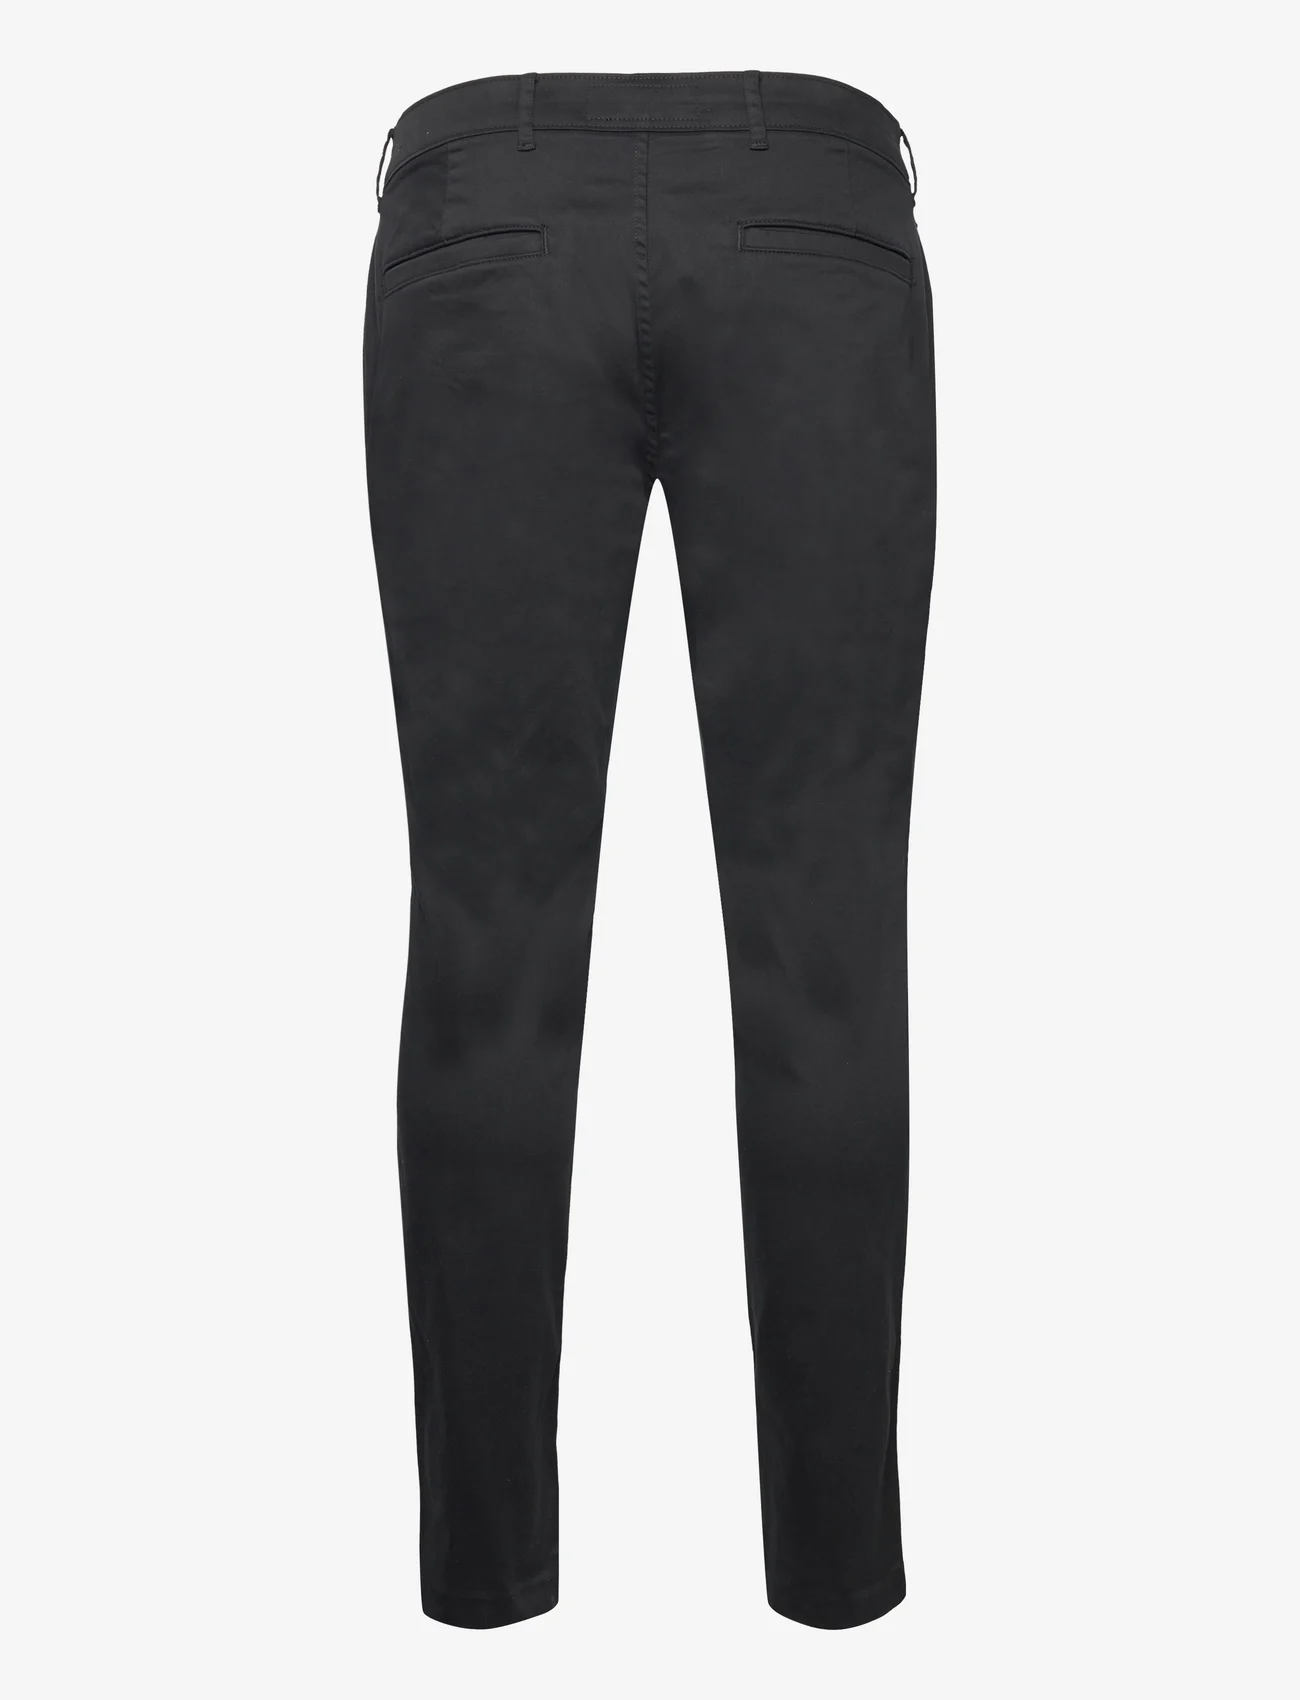 Abercrombie & Fitch - ANF MENS PANTS - chino stila bikses - casual black - 1